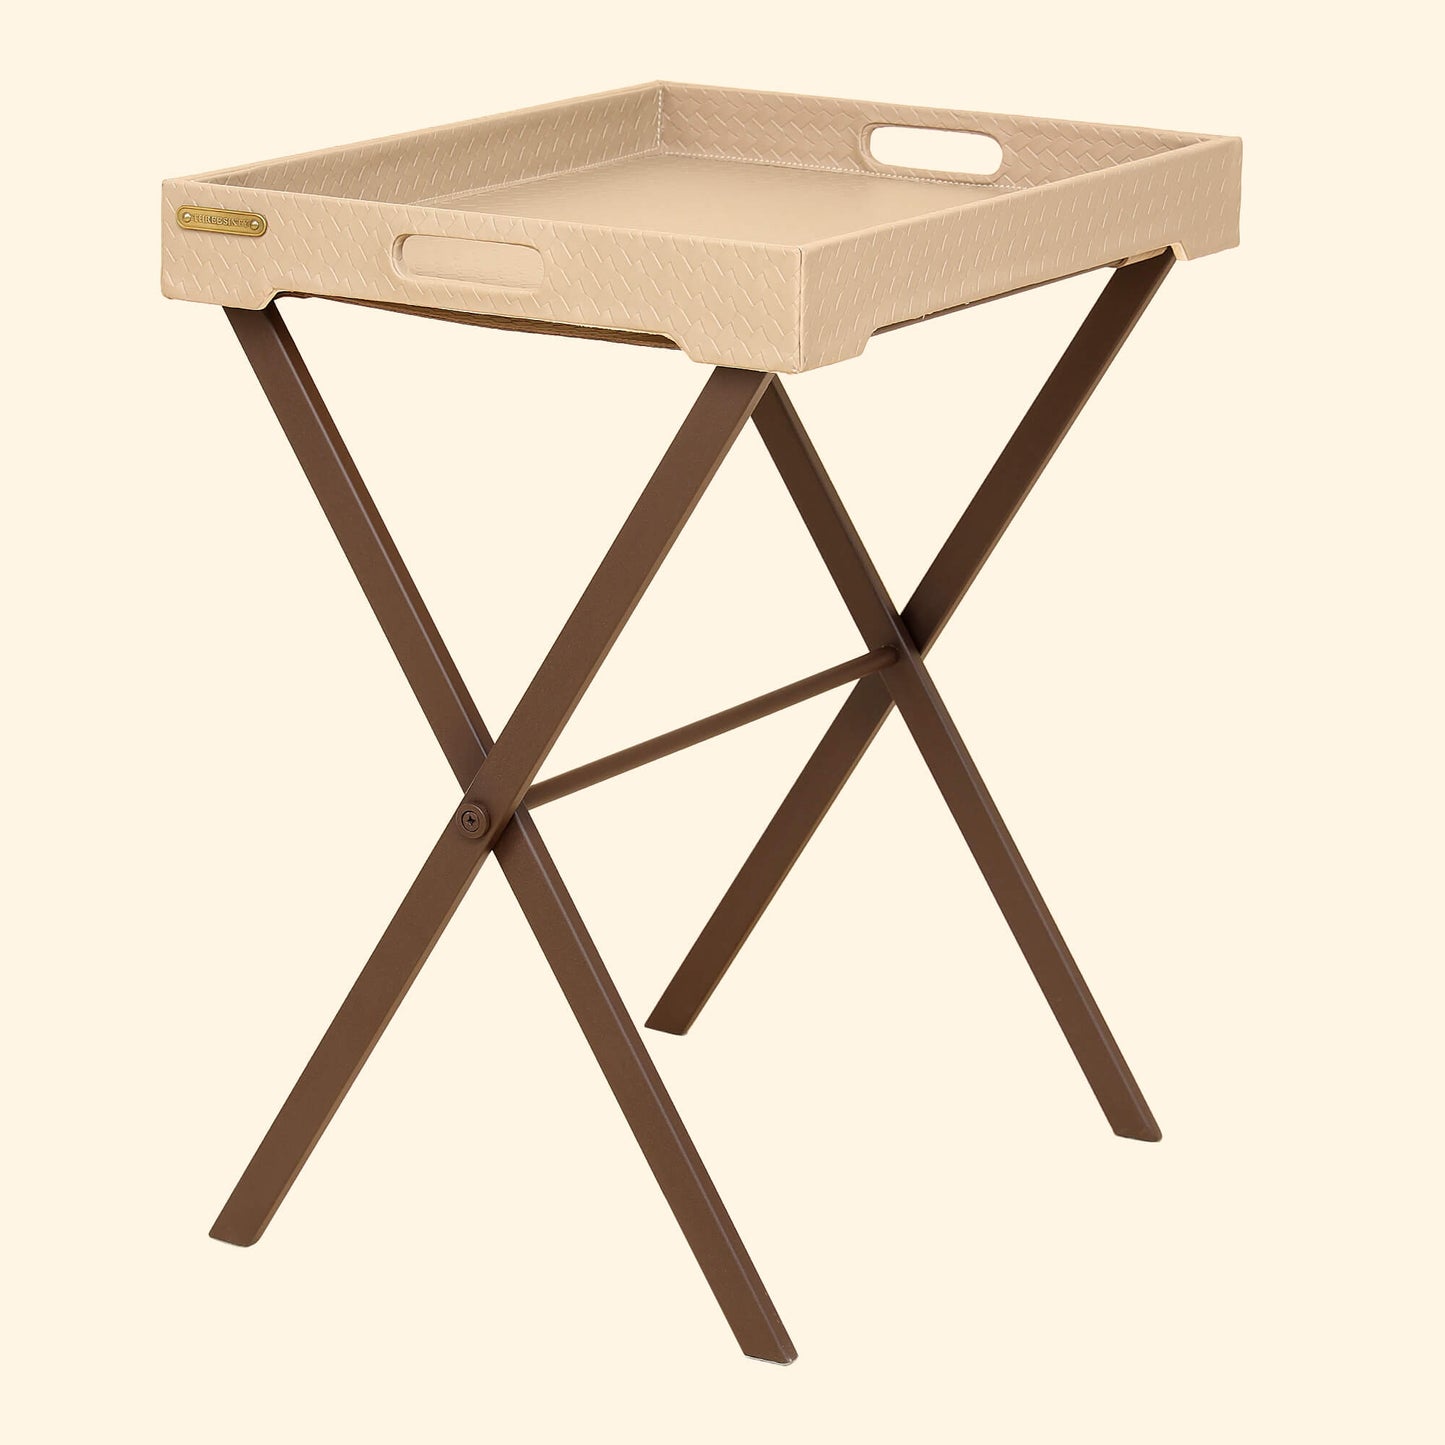 Tray On Stand Beige